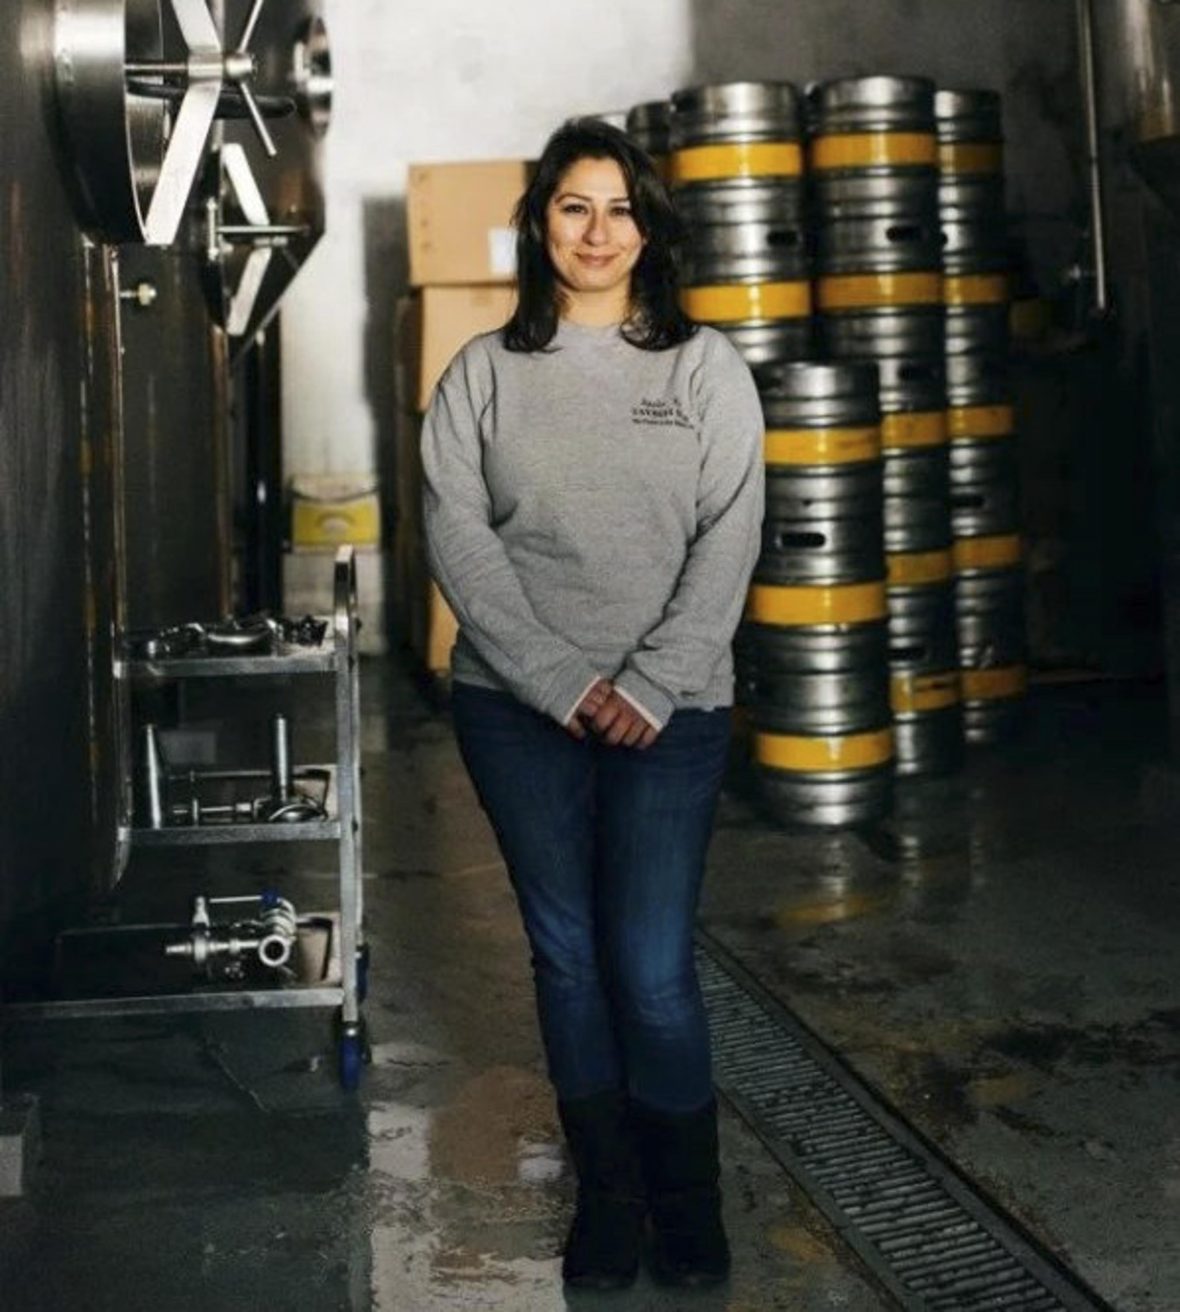 A portrait of Madees Khoury with beer barrels in the background.